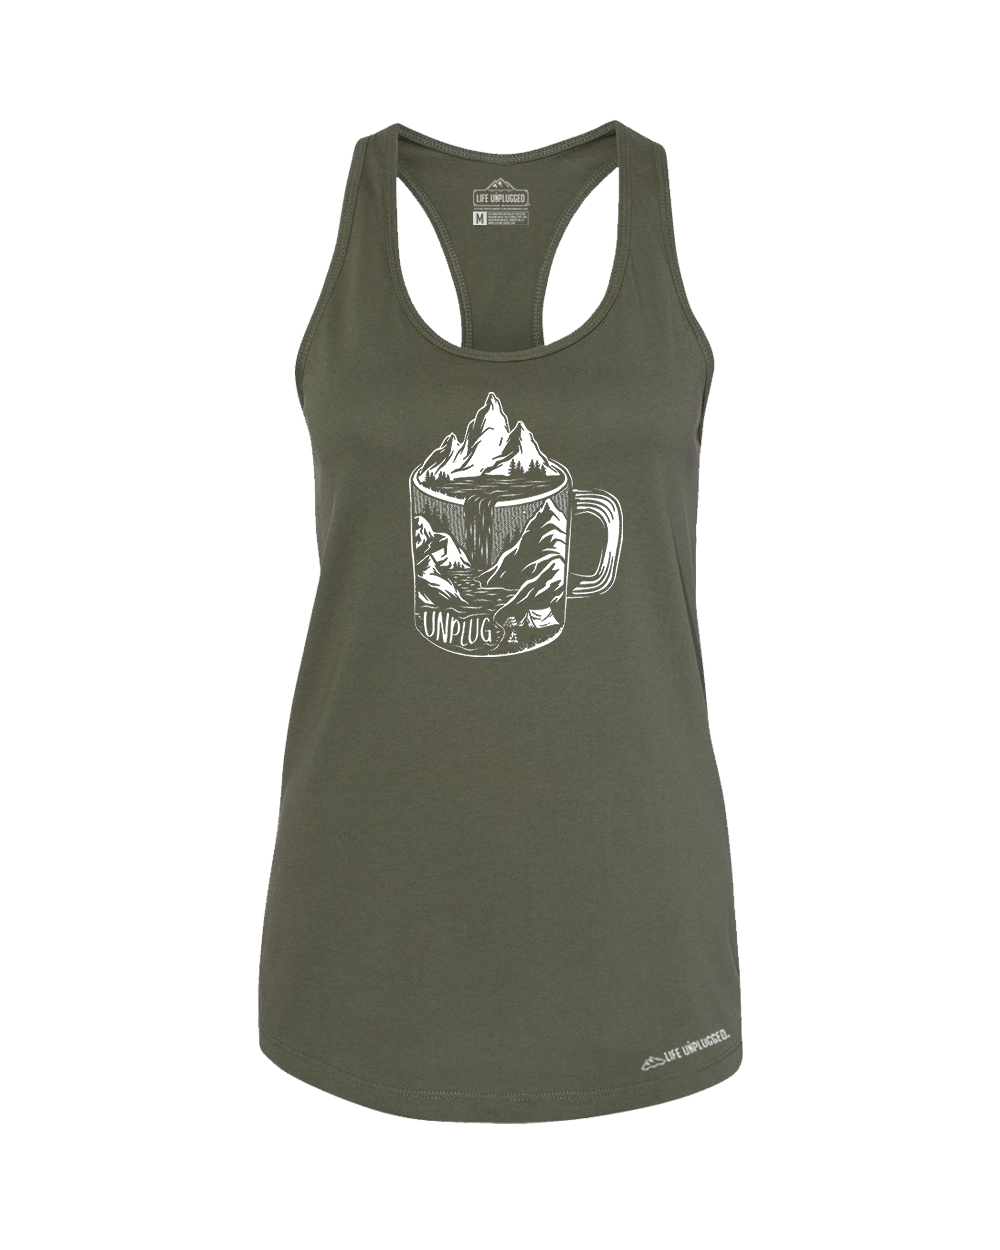 Coffee Mountain Scene Premium Women's Relaxed Fit Racerback Tank Top - Life Unplugged